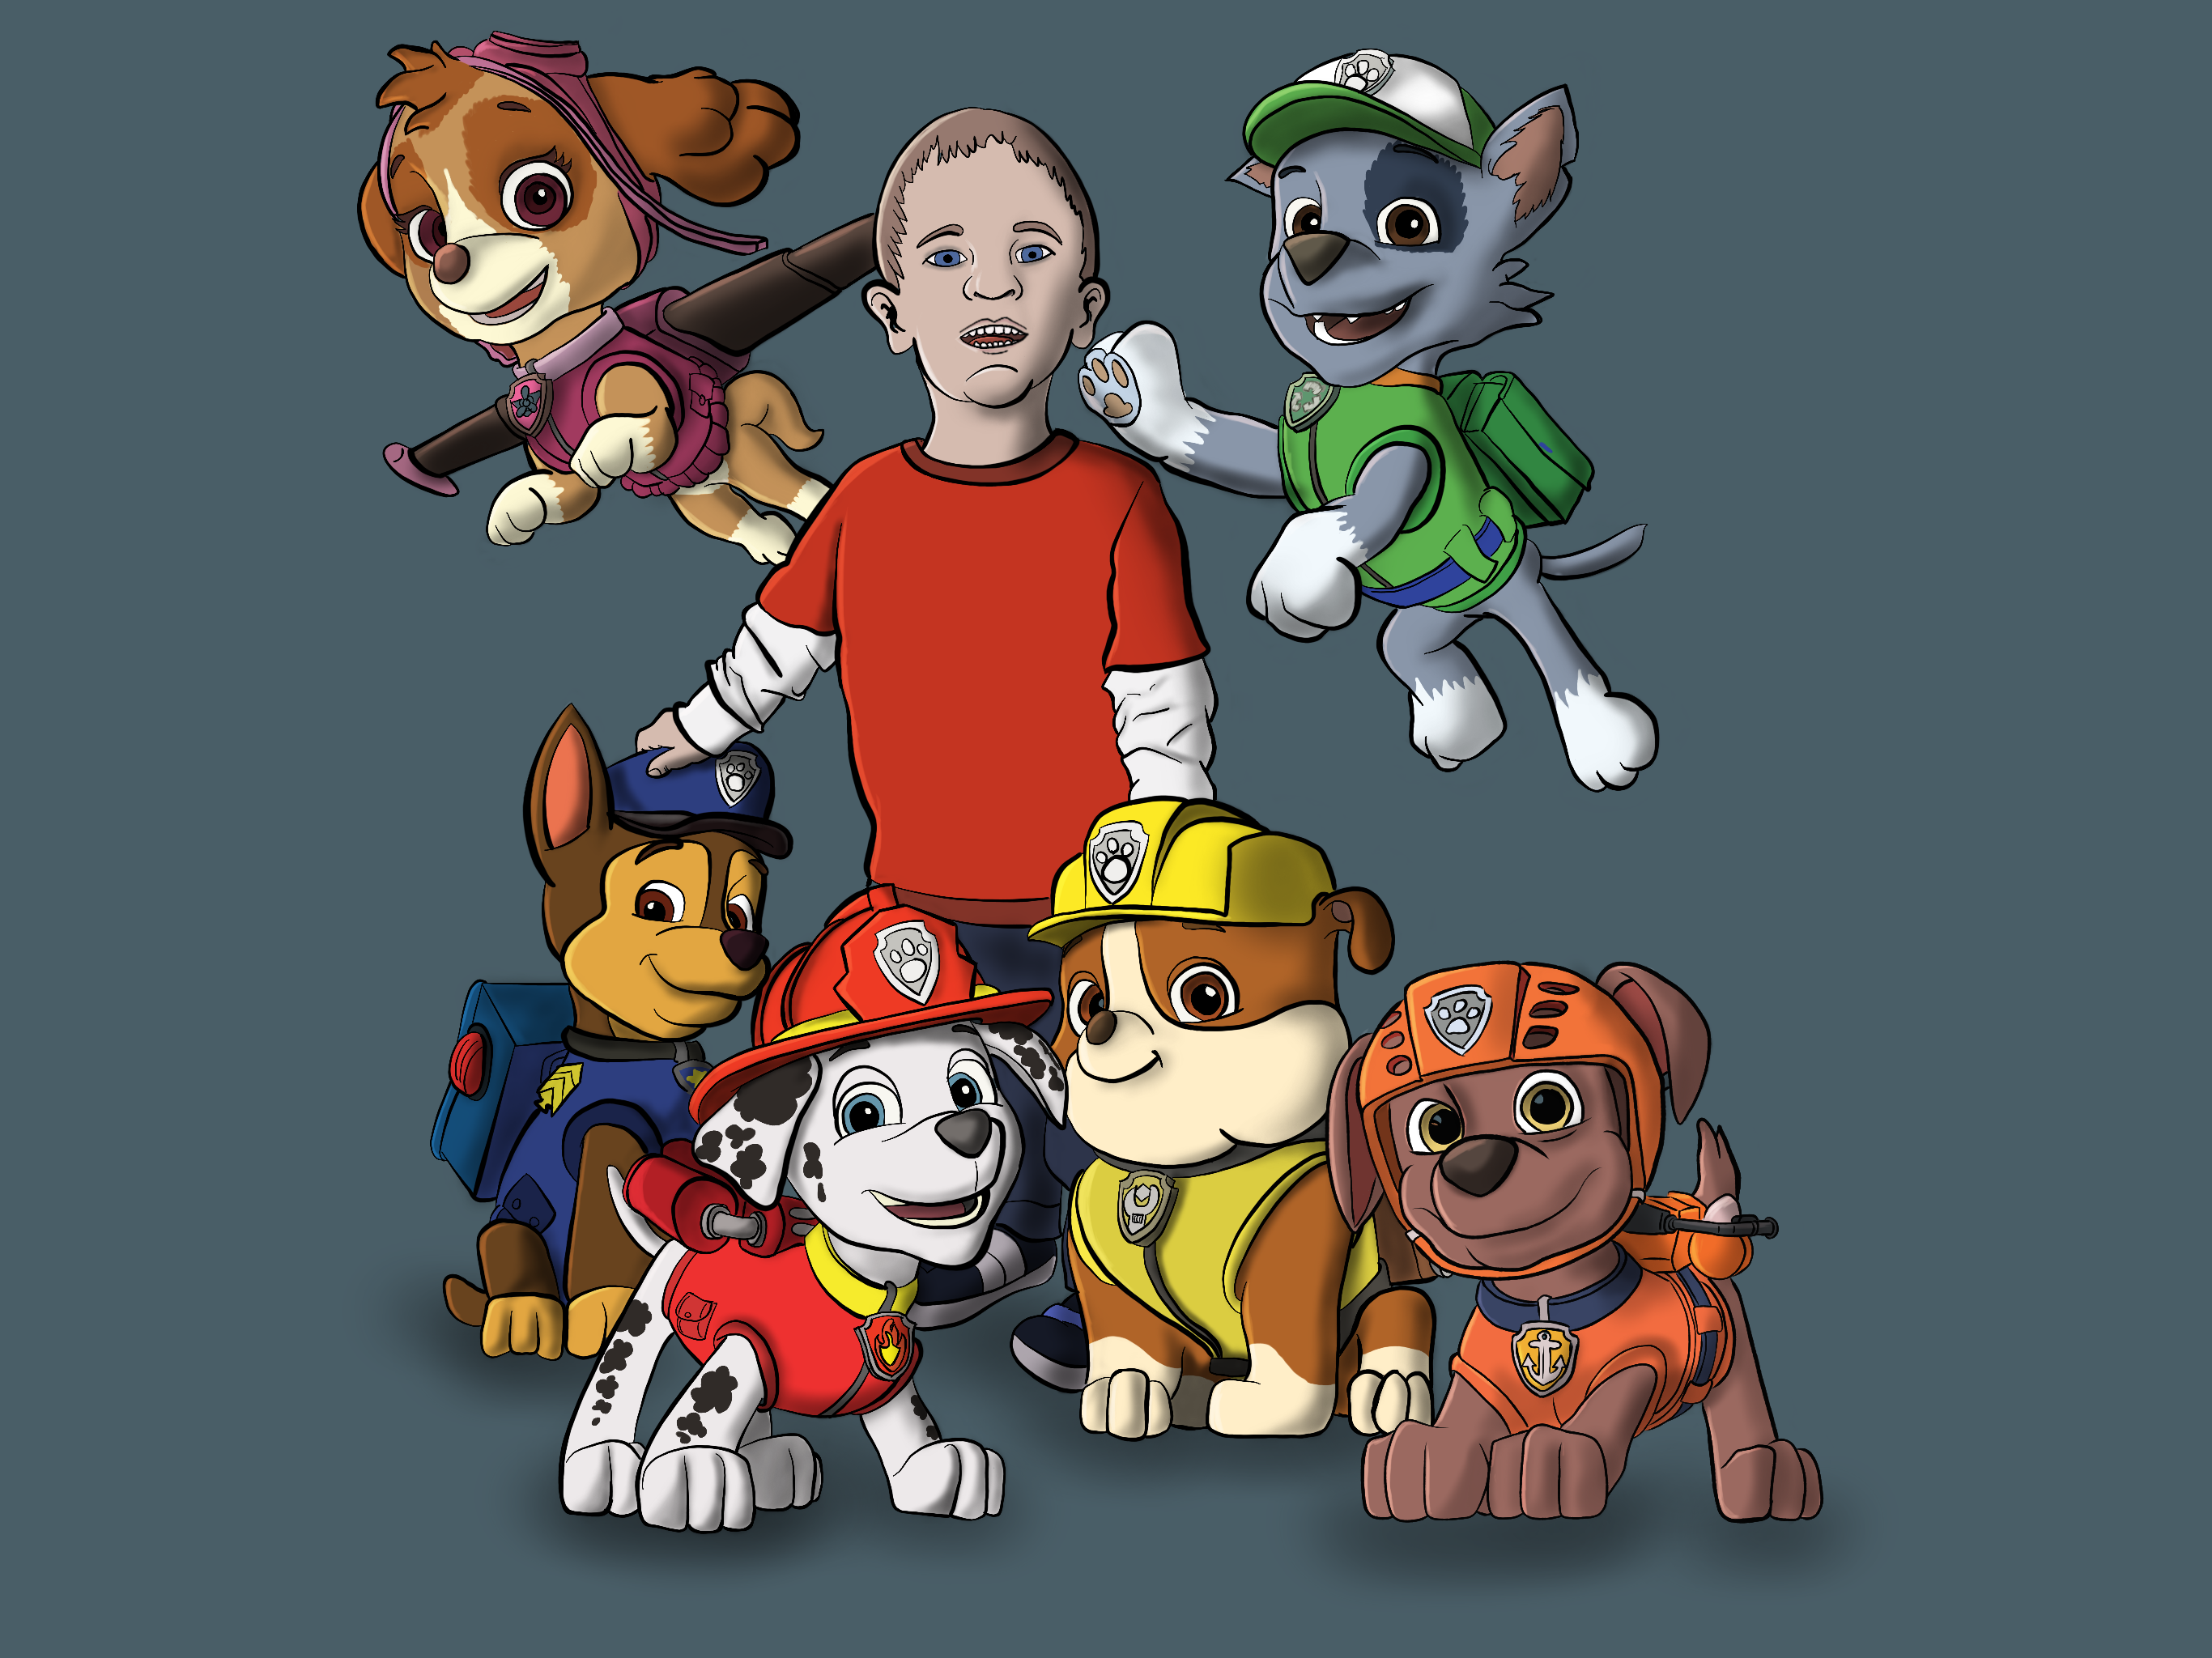 Drawing Of My Son With Paw Patrol - Steemit.